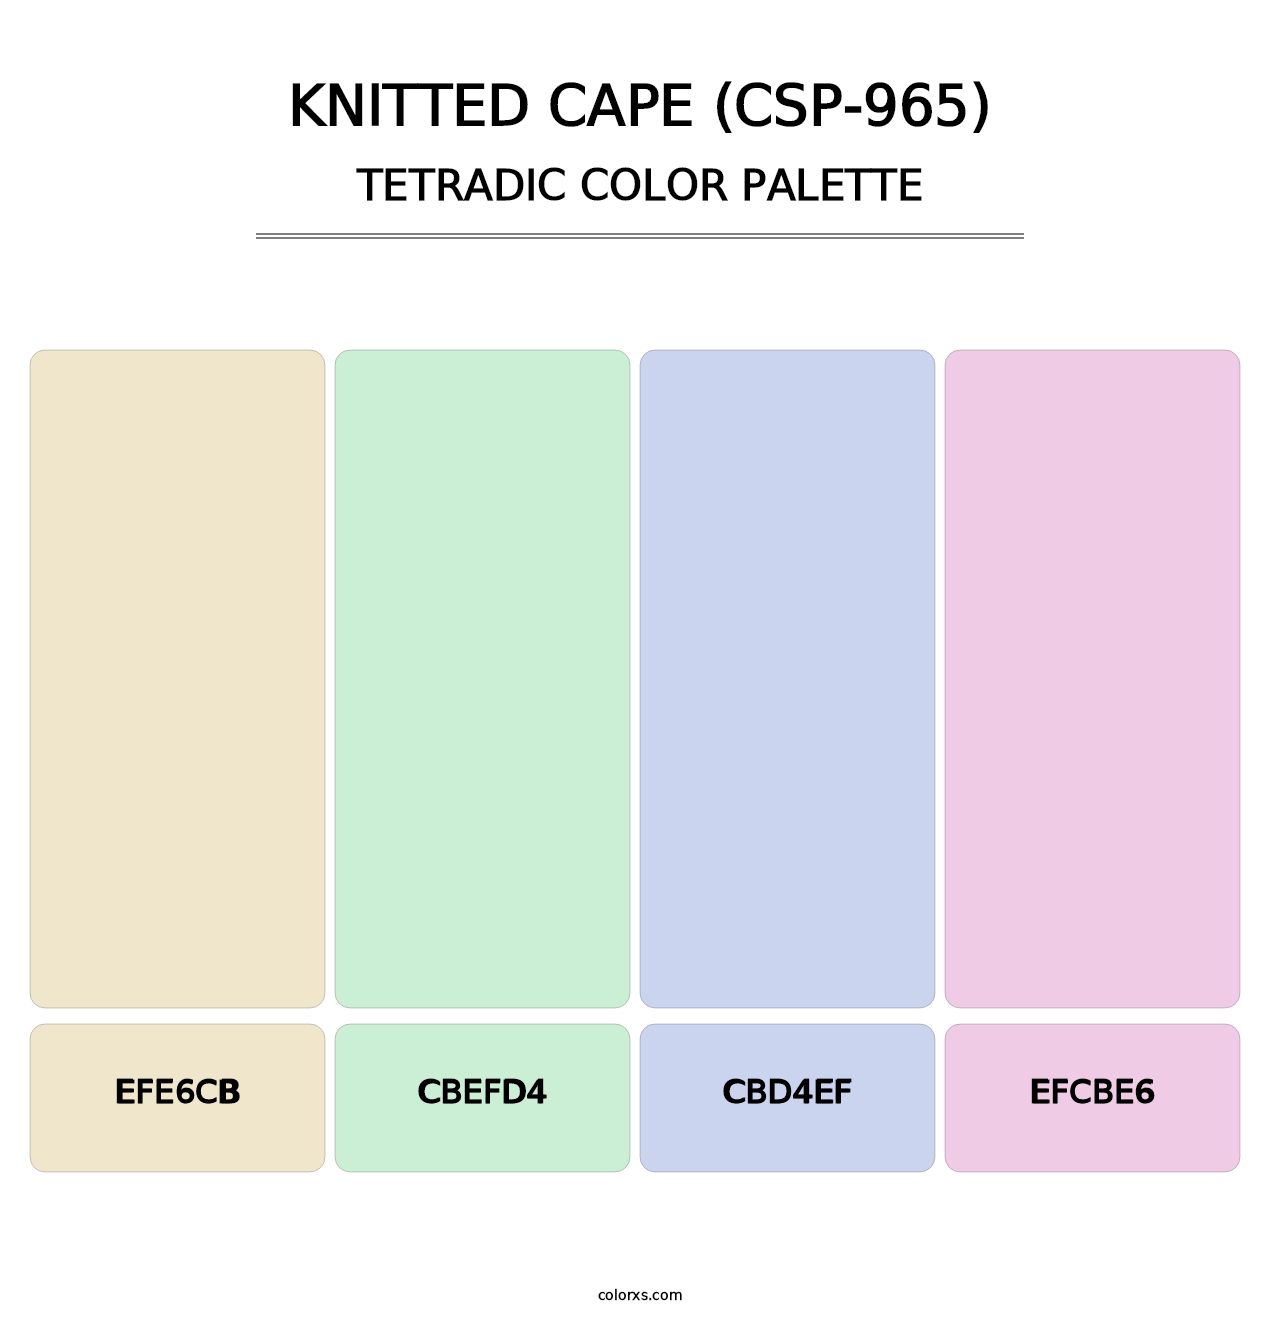 Knitted Cape (CSP-965) - Tetradic Color Palette